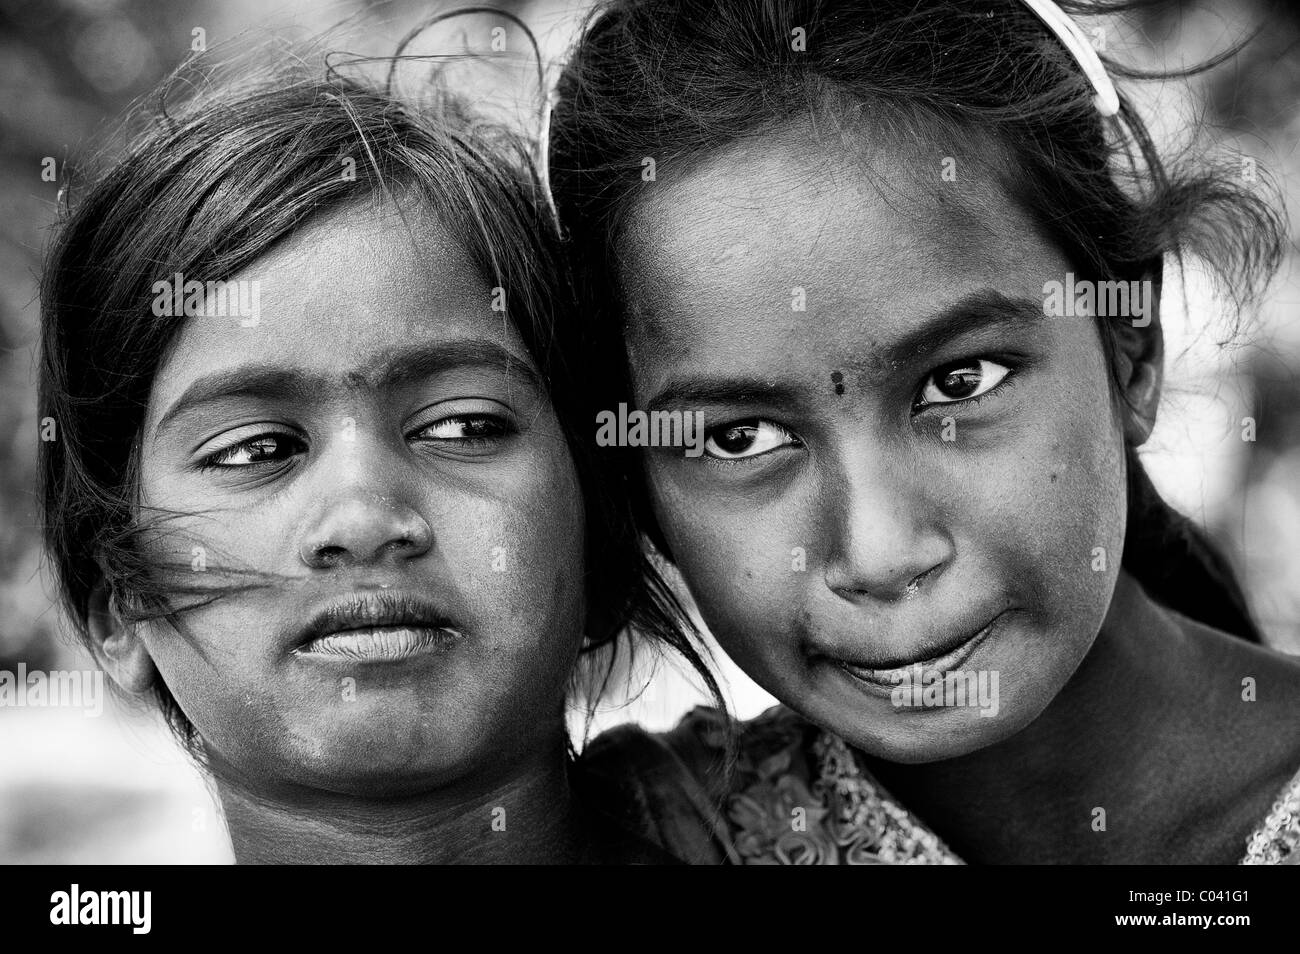 Thoughtful young poor lower caste Indian street girls. Sisters. Black and white. Andhra Pradesh, India Stock Photo